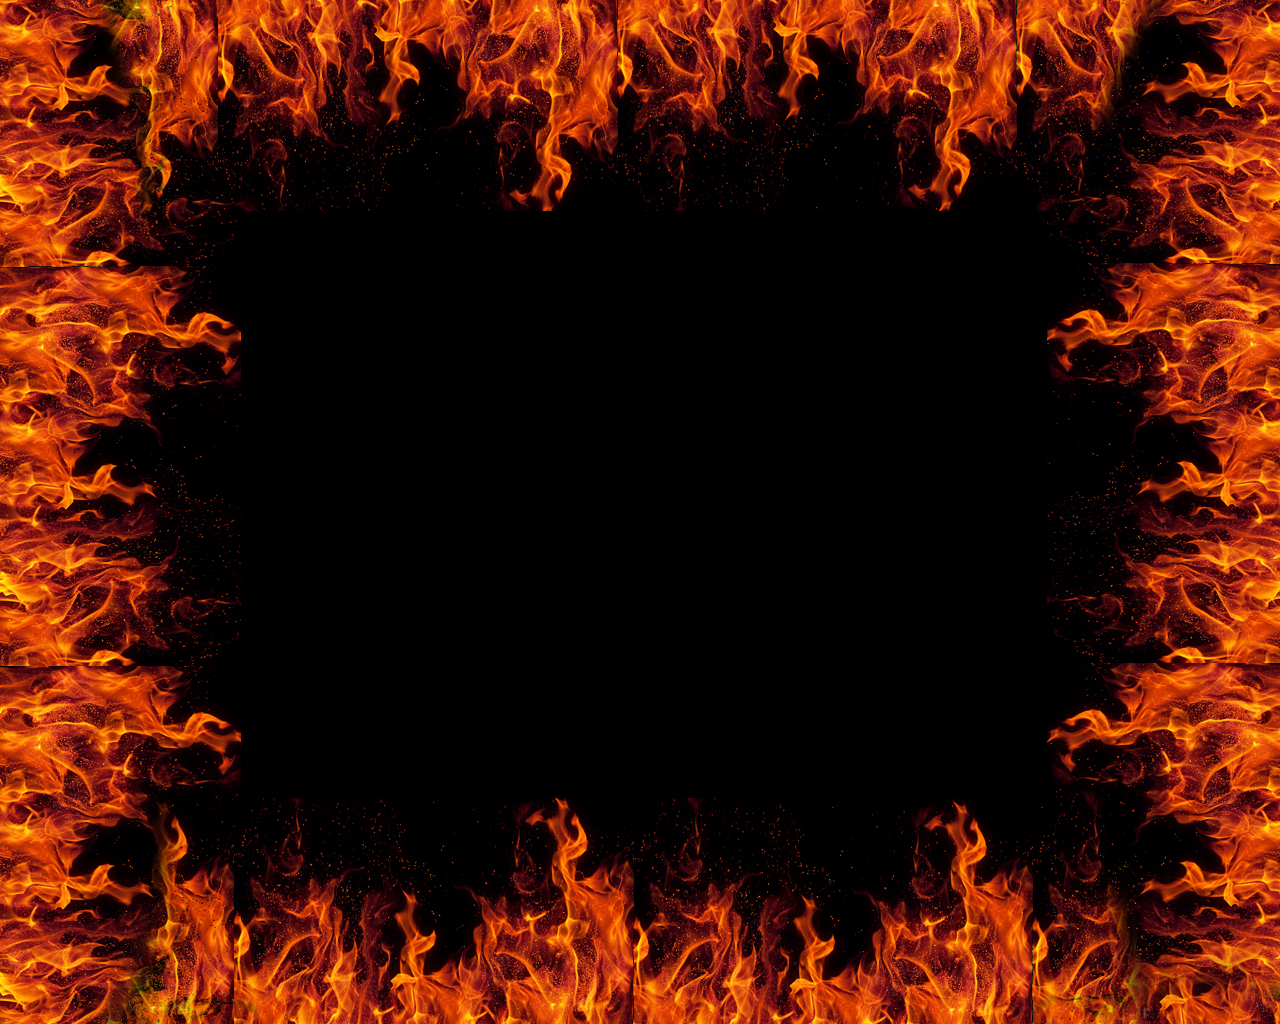 Flames in Fireplace Wallpapers